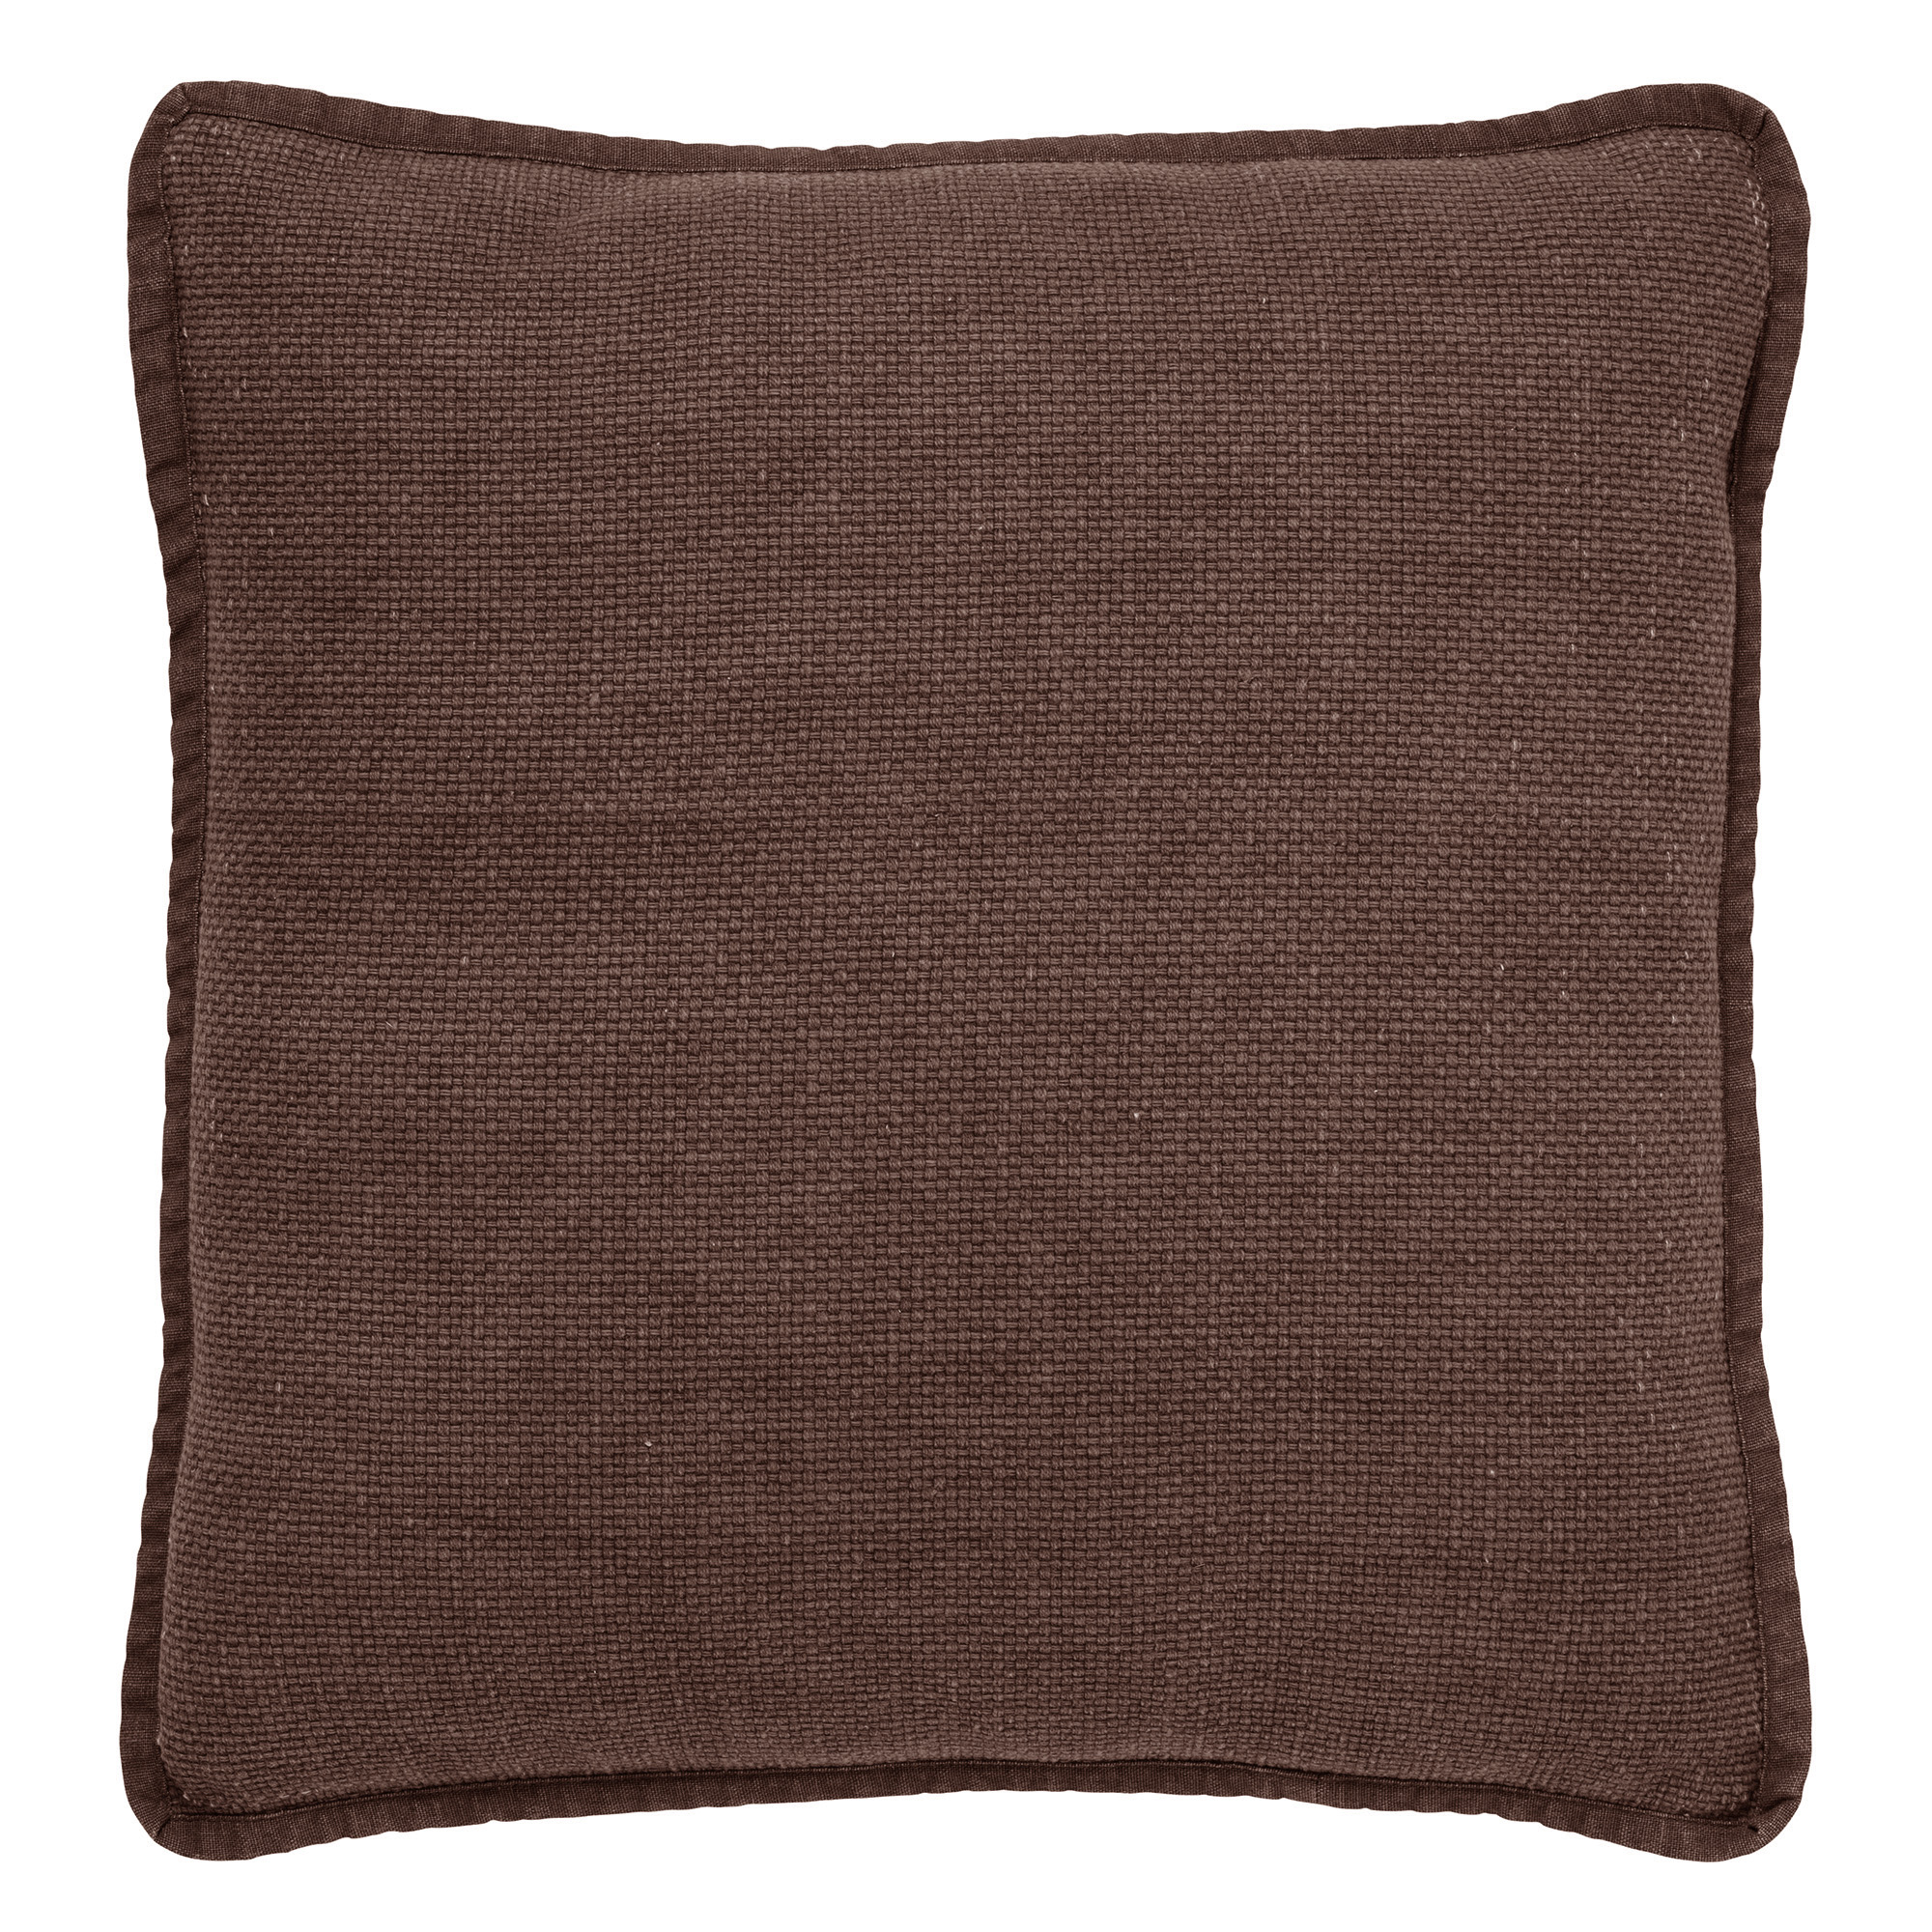 Bowie - Cushion washed cotton - 45x45 cm - Chocolate Martini - brown